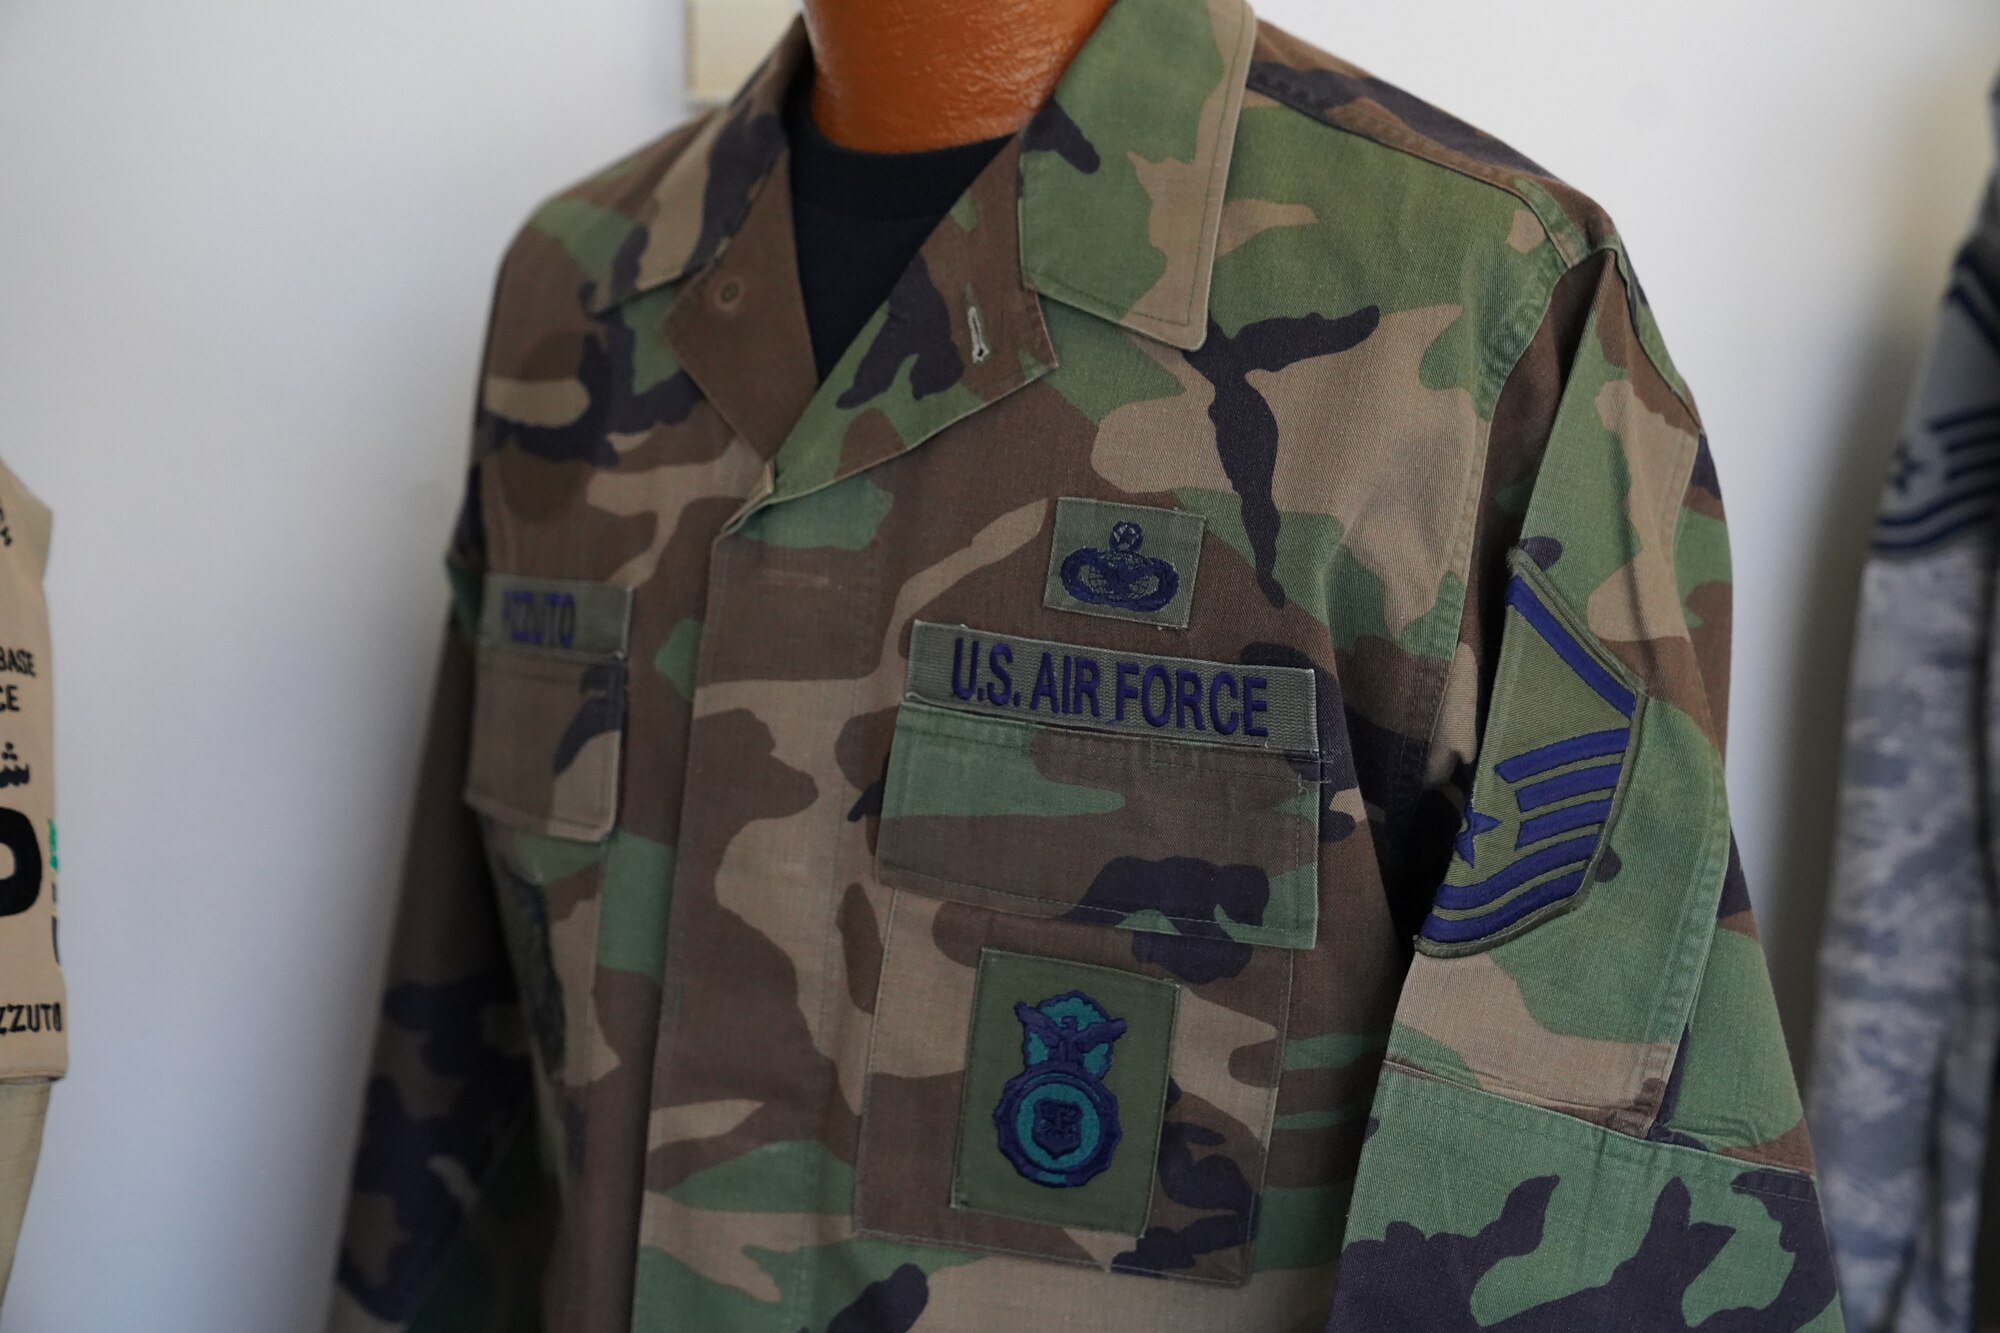 A battle dress uniform owned by Chief Master Sgt. David Pizzuto, 81st Training Wing command chief, is displayed inside of the Levitow Training Support Facility at Keesler Air Force Base, Mississippi, May 6, 2020. Pizzuto, who is slated to retire this month, has served for 37 years and has worn every uniform the Air Force has ever known. (U.S. Air Force photo by Airman 1st Class Spencer Tobler)